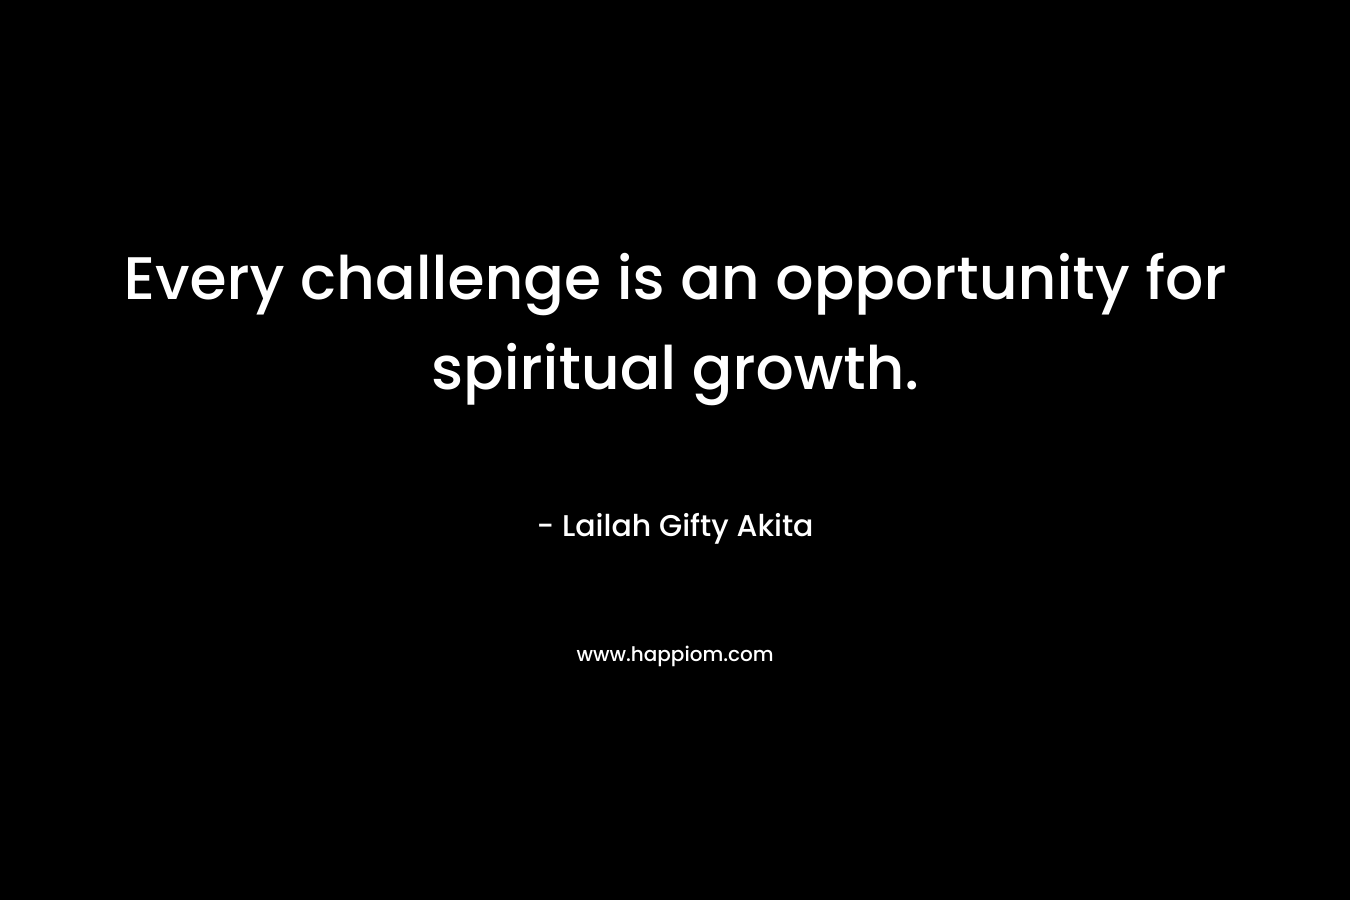 Every challenge is an opportunity for spiritual growth.